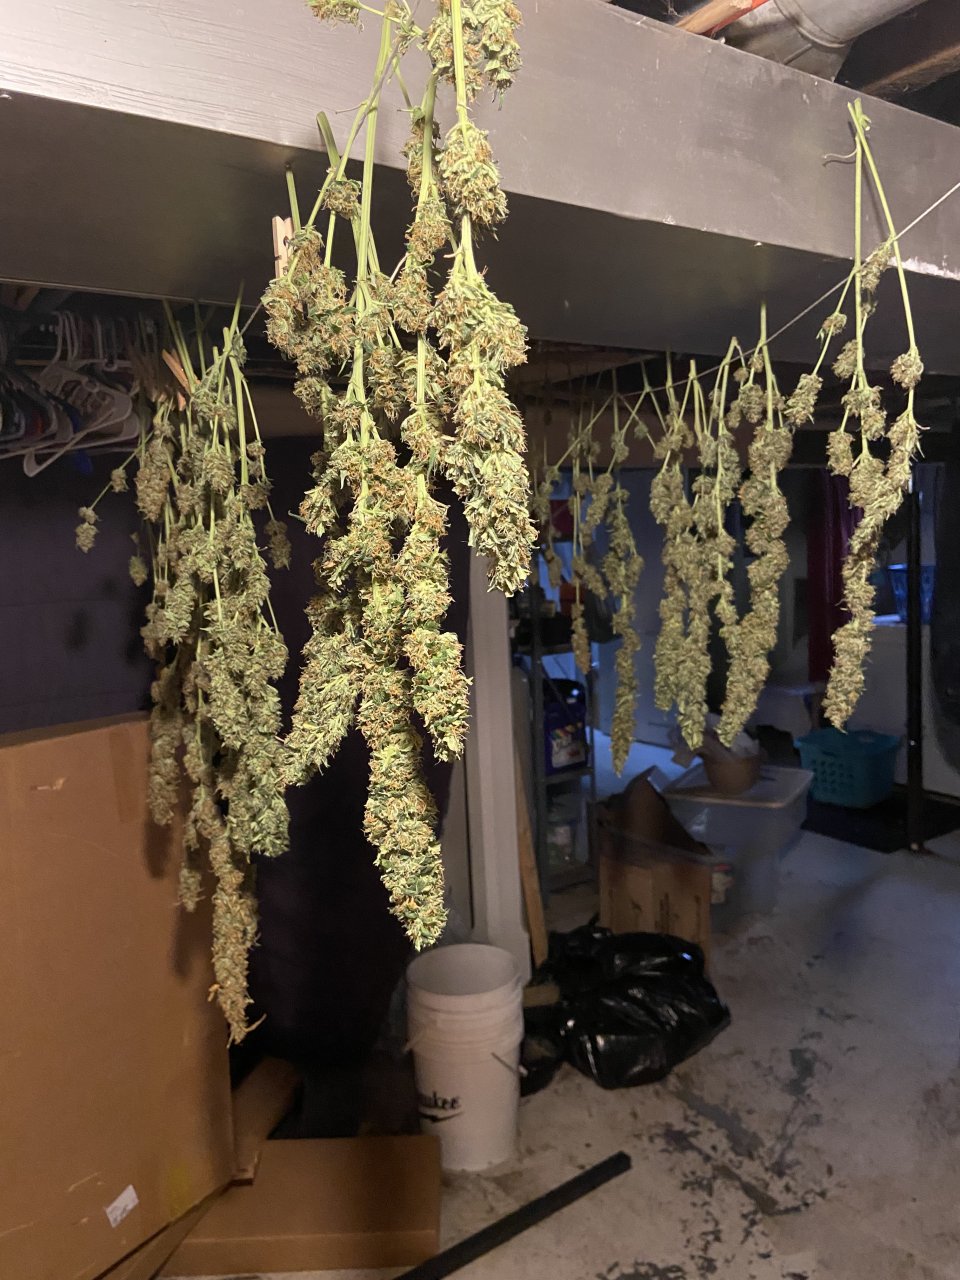 Winter Sativa in the Rafters